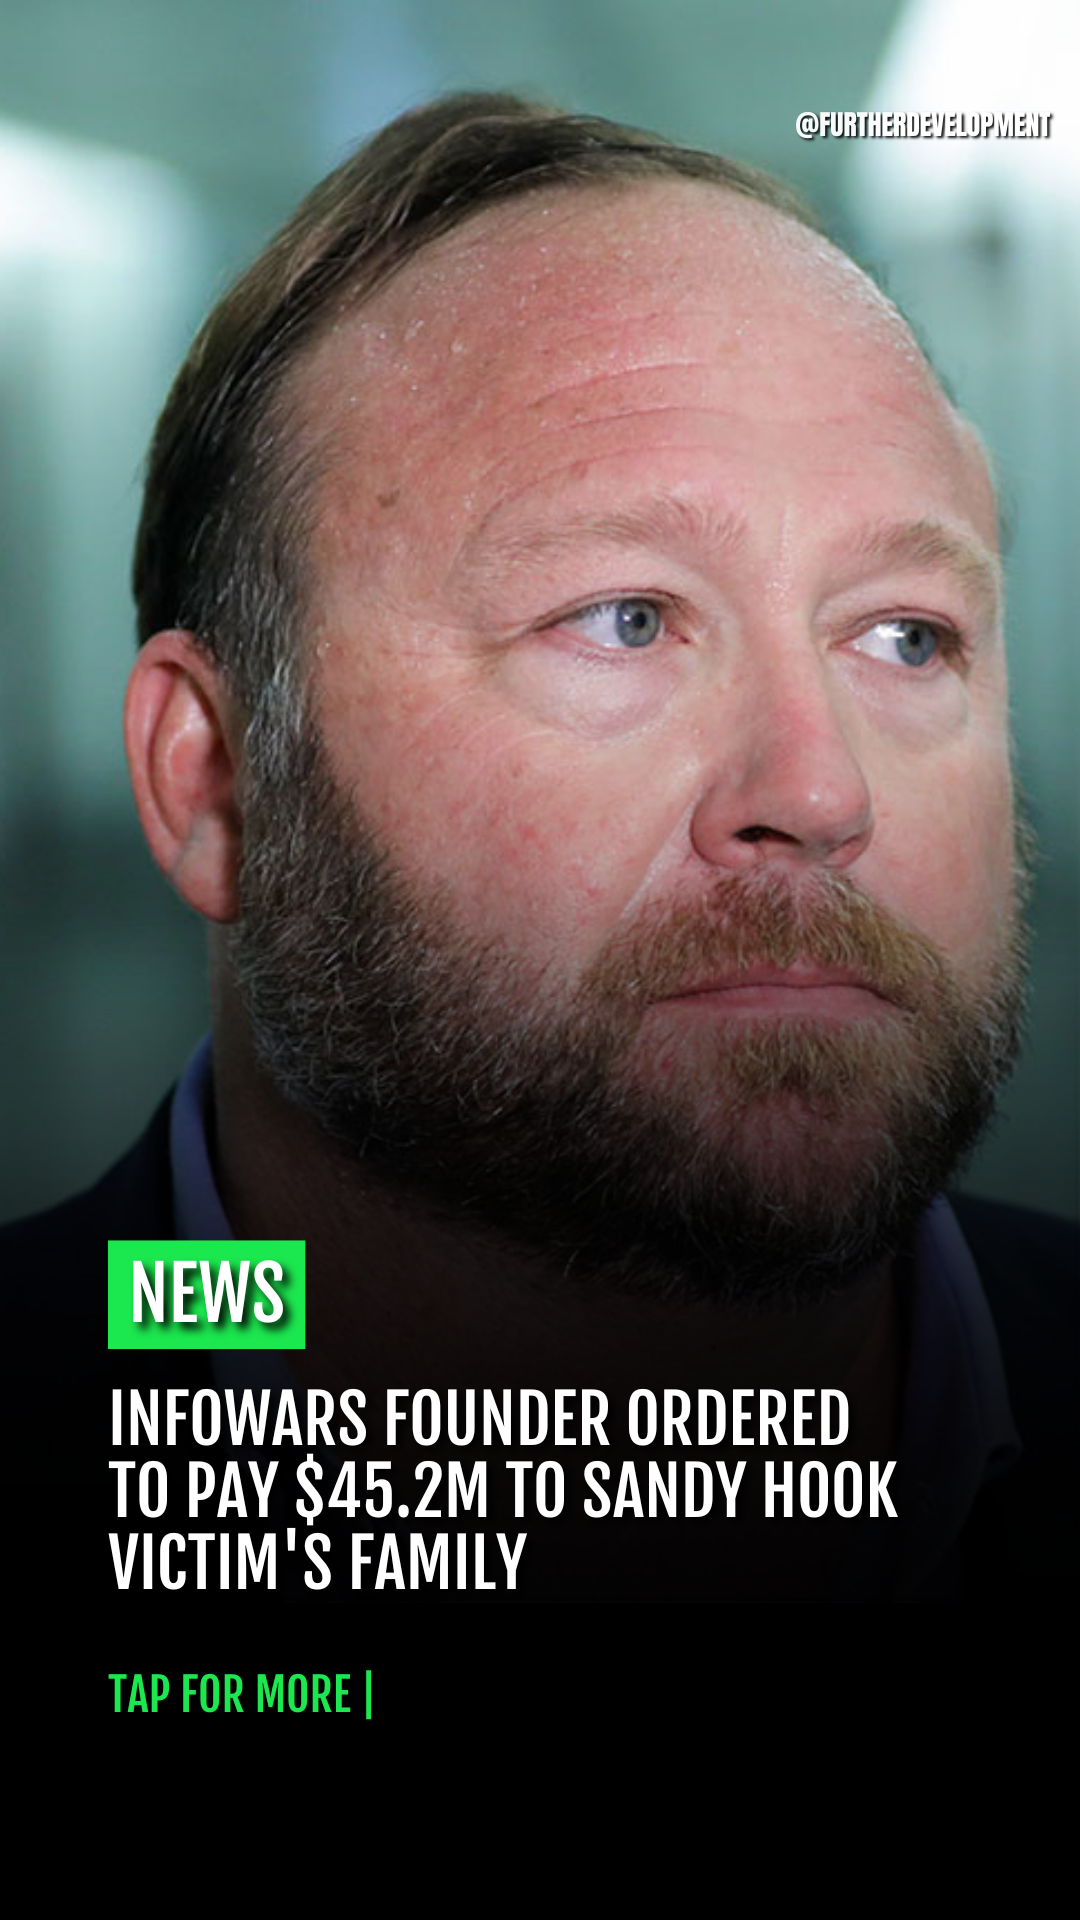 Infowars founder ordered to pay $45.2M to Sandy Hook victim's family